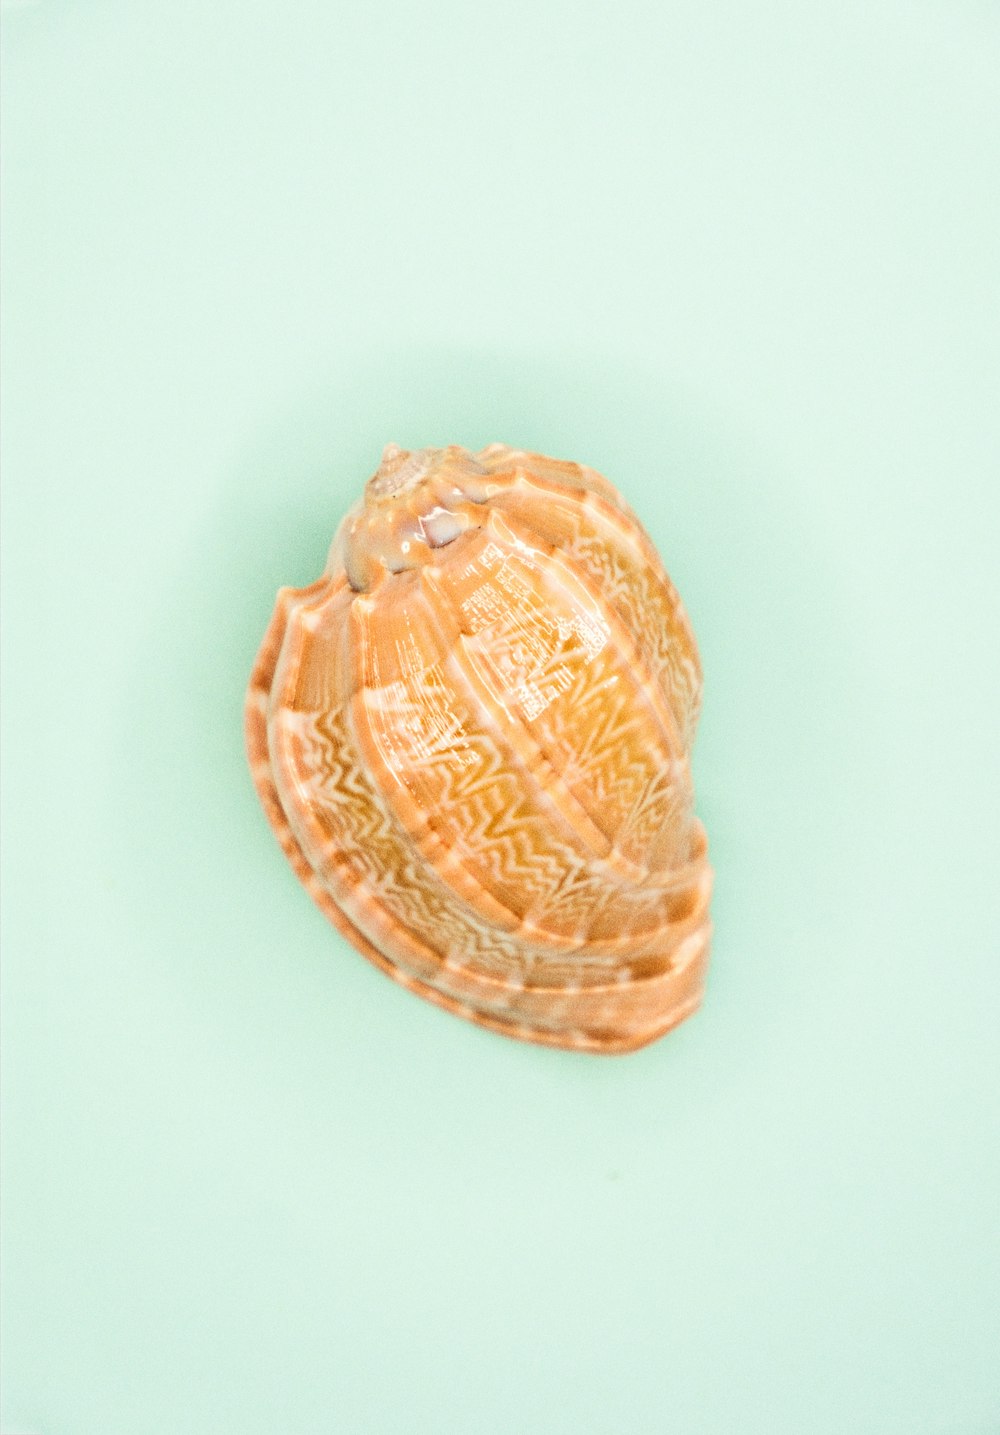 brown sea shell on white surface